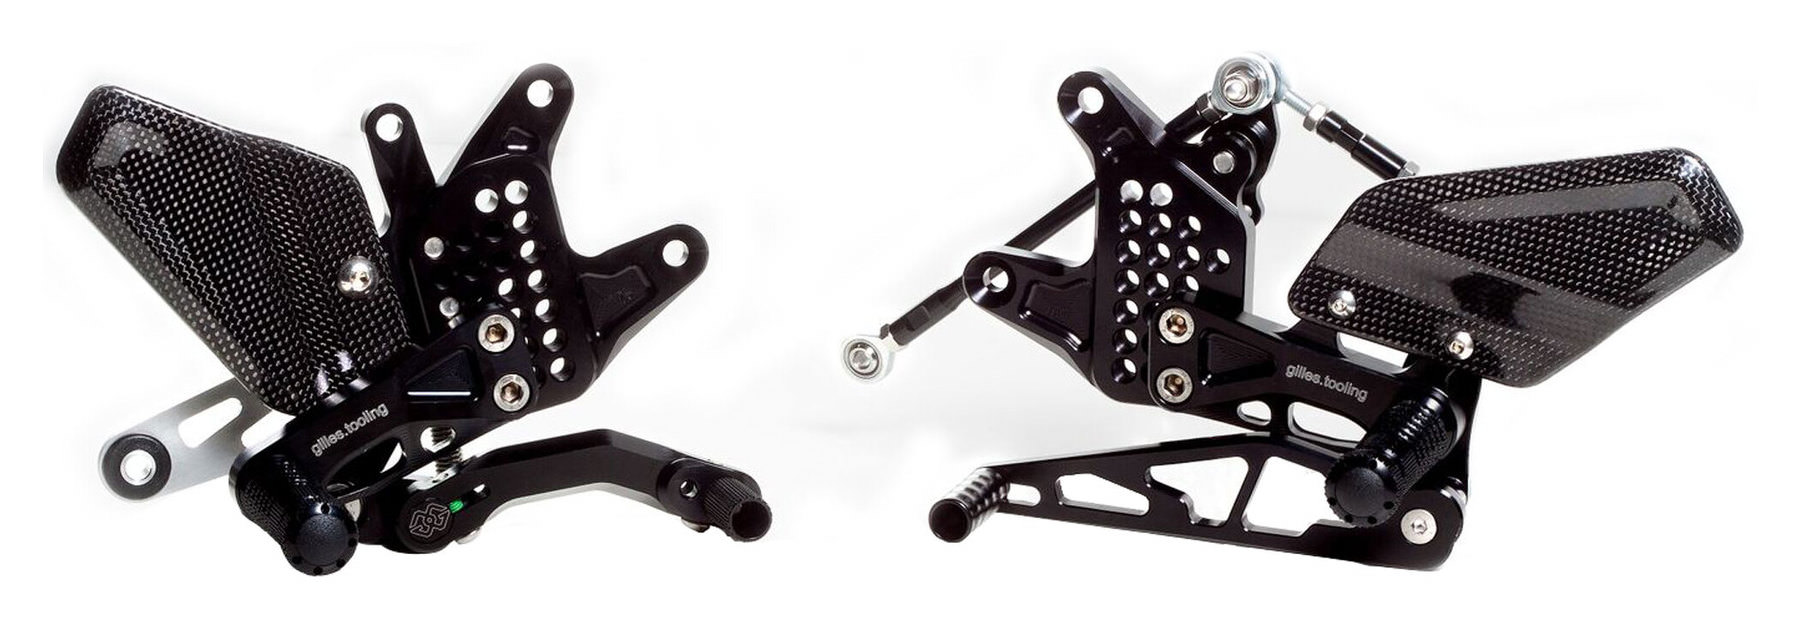 Buy Gilles Rearset AS31GT | Louis motorcycle clothing and technology